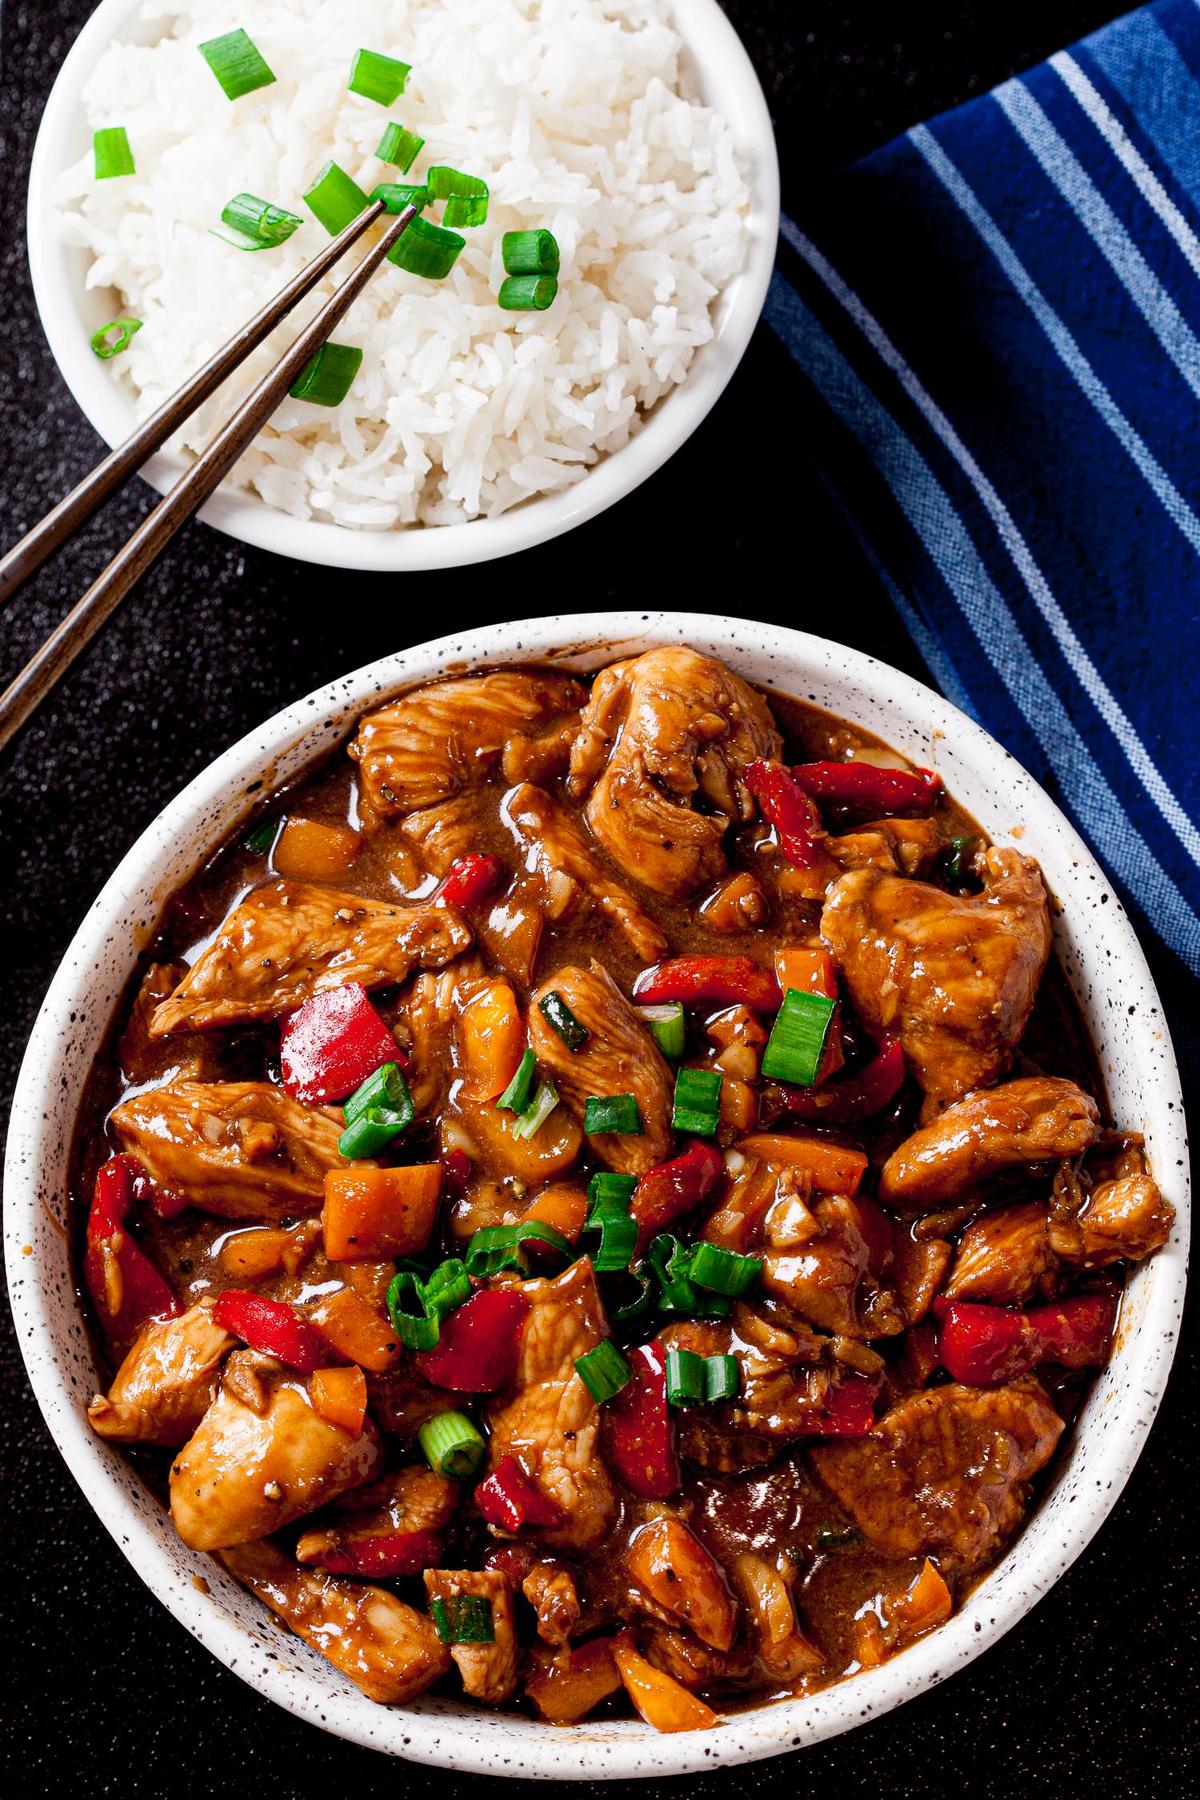 Serve saucy Kung Pao Chicken with a bed of fluffy Jasmine rice. (Courtesy of Amy Dong)